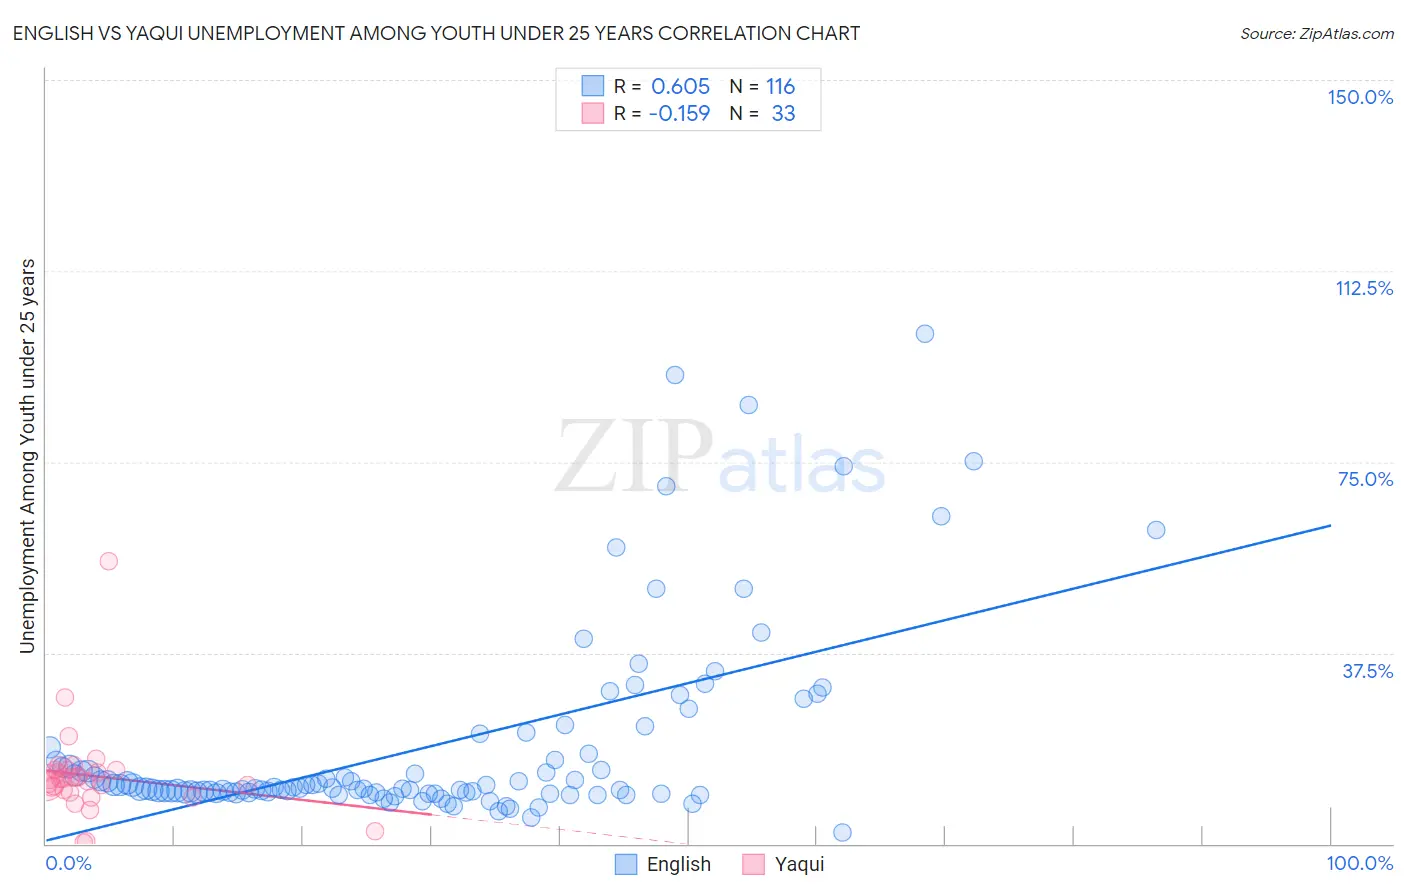 English vs Yaqui Unemployment Among Youth under 25 years